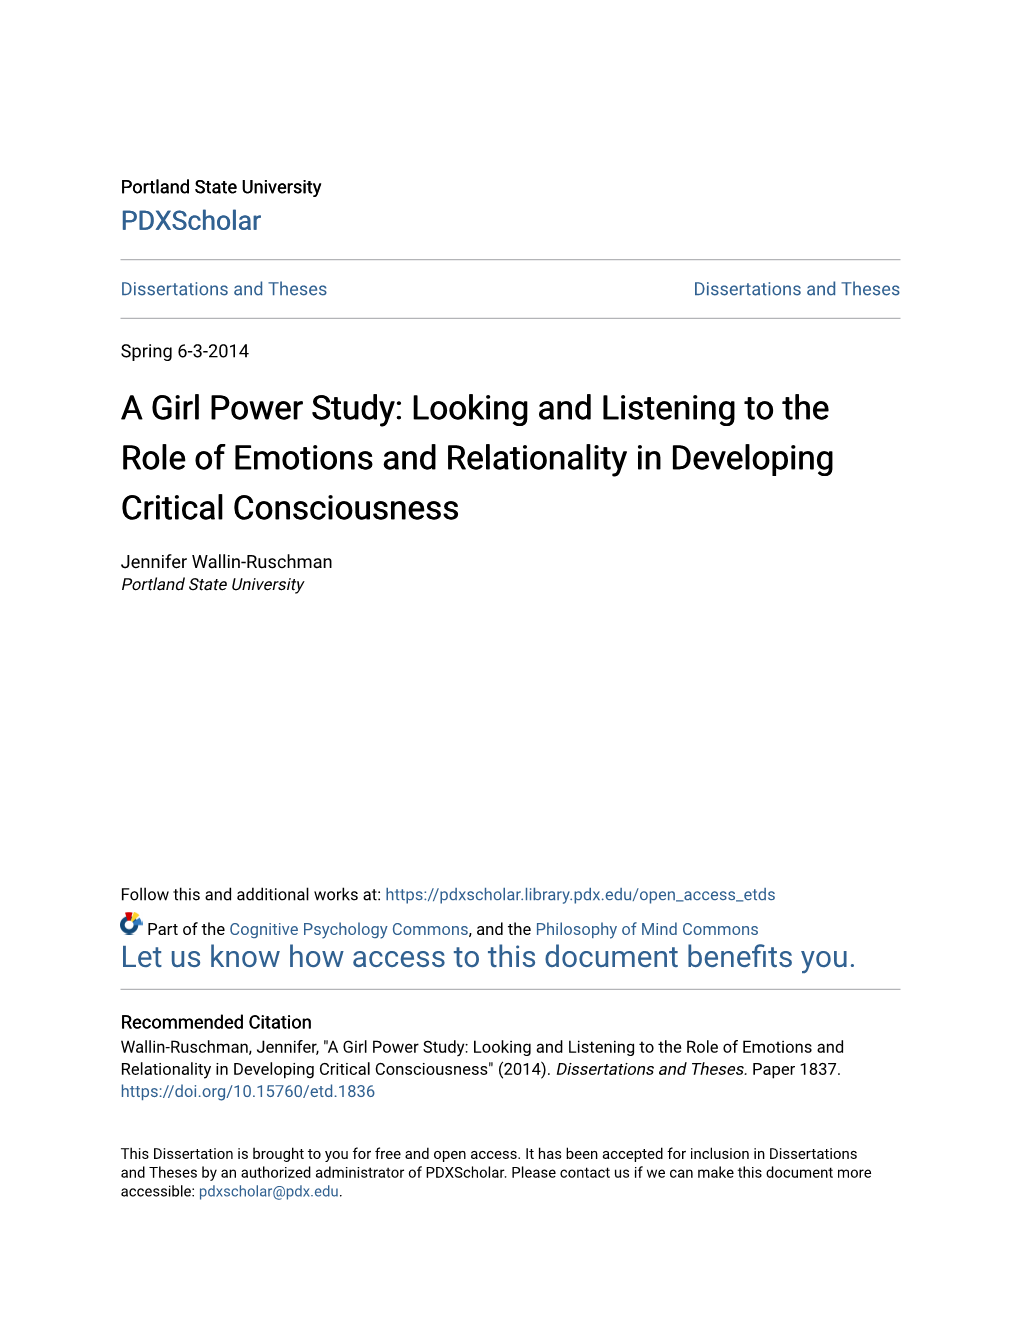 A Girl Power Study: Looking and Listening to the Role of Emotions and Relationality in Developing Critical Consciousness